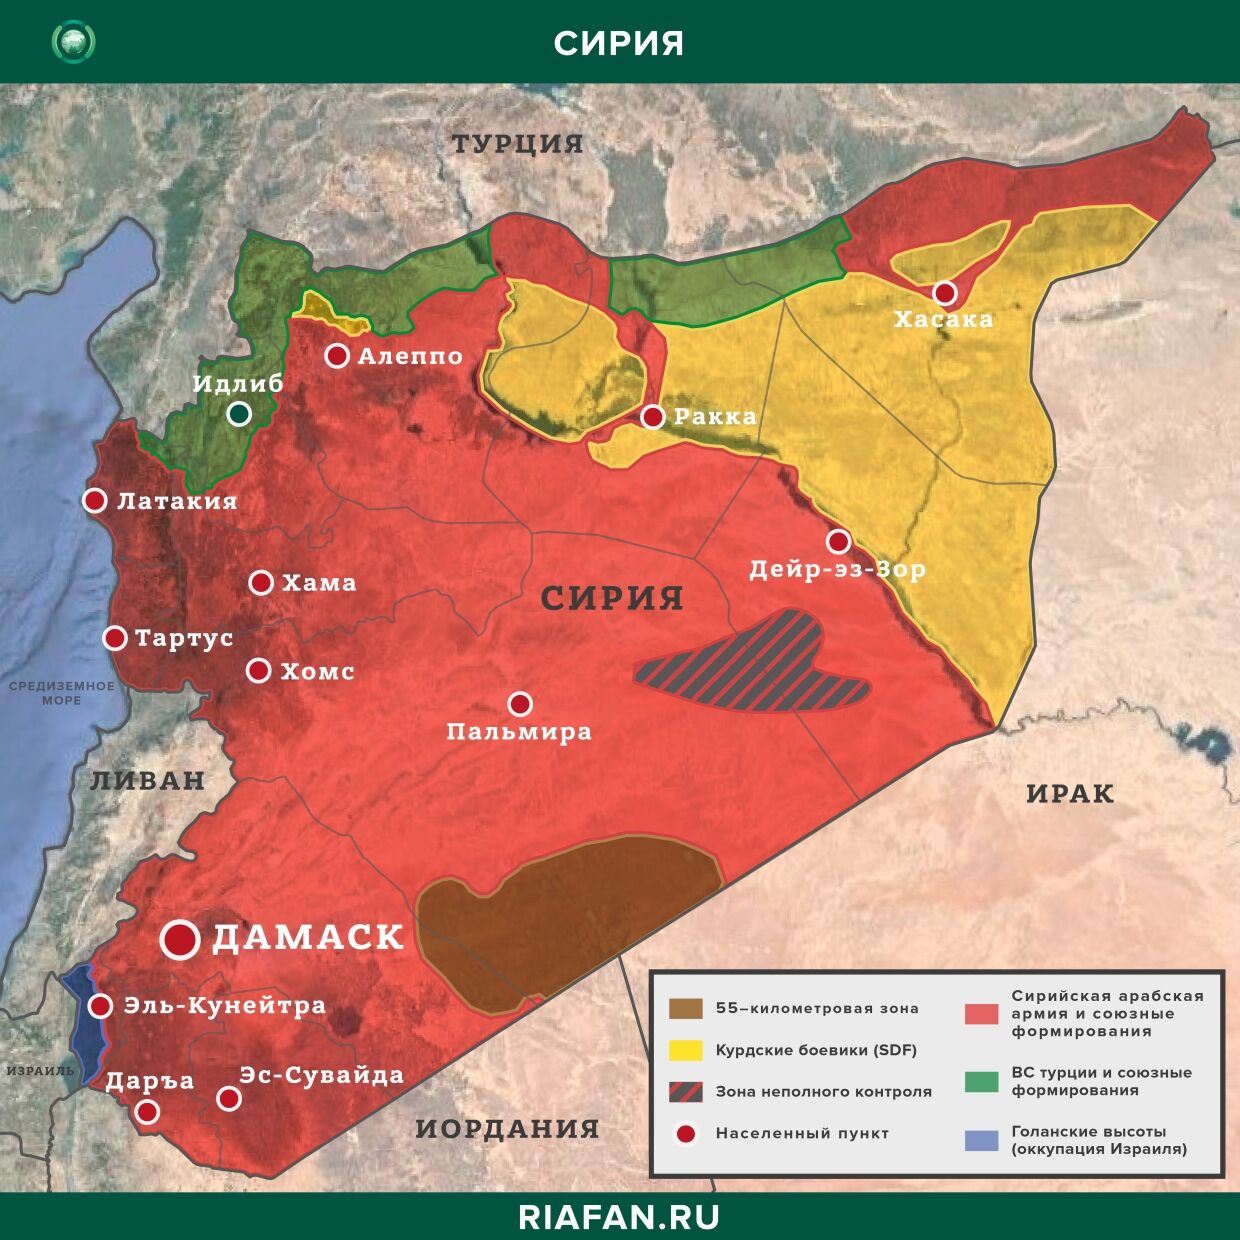 Syria news 16 April 22.30: Allies of Turkey opened fire on civilians in Aleppo, the IG * attack in Darah